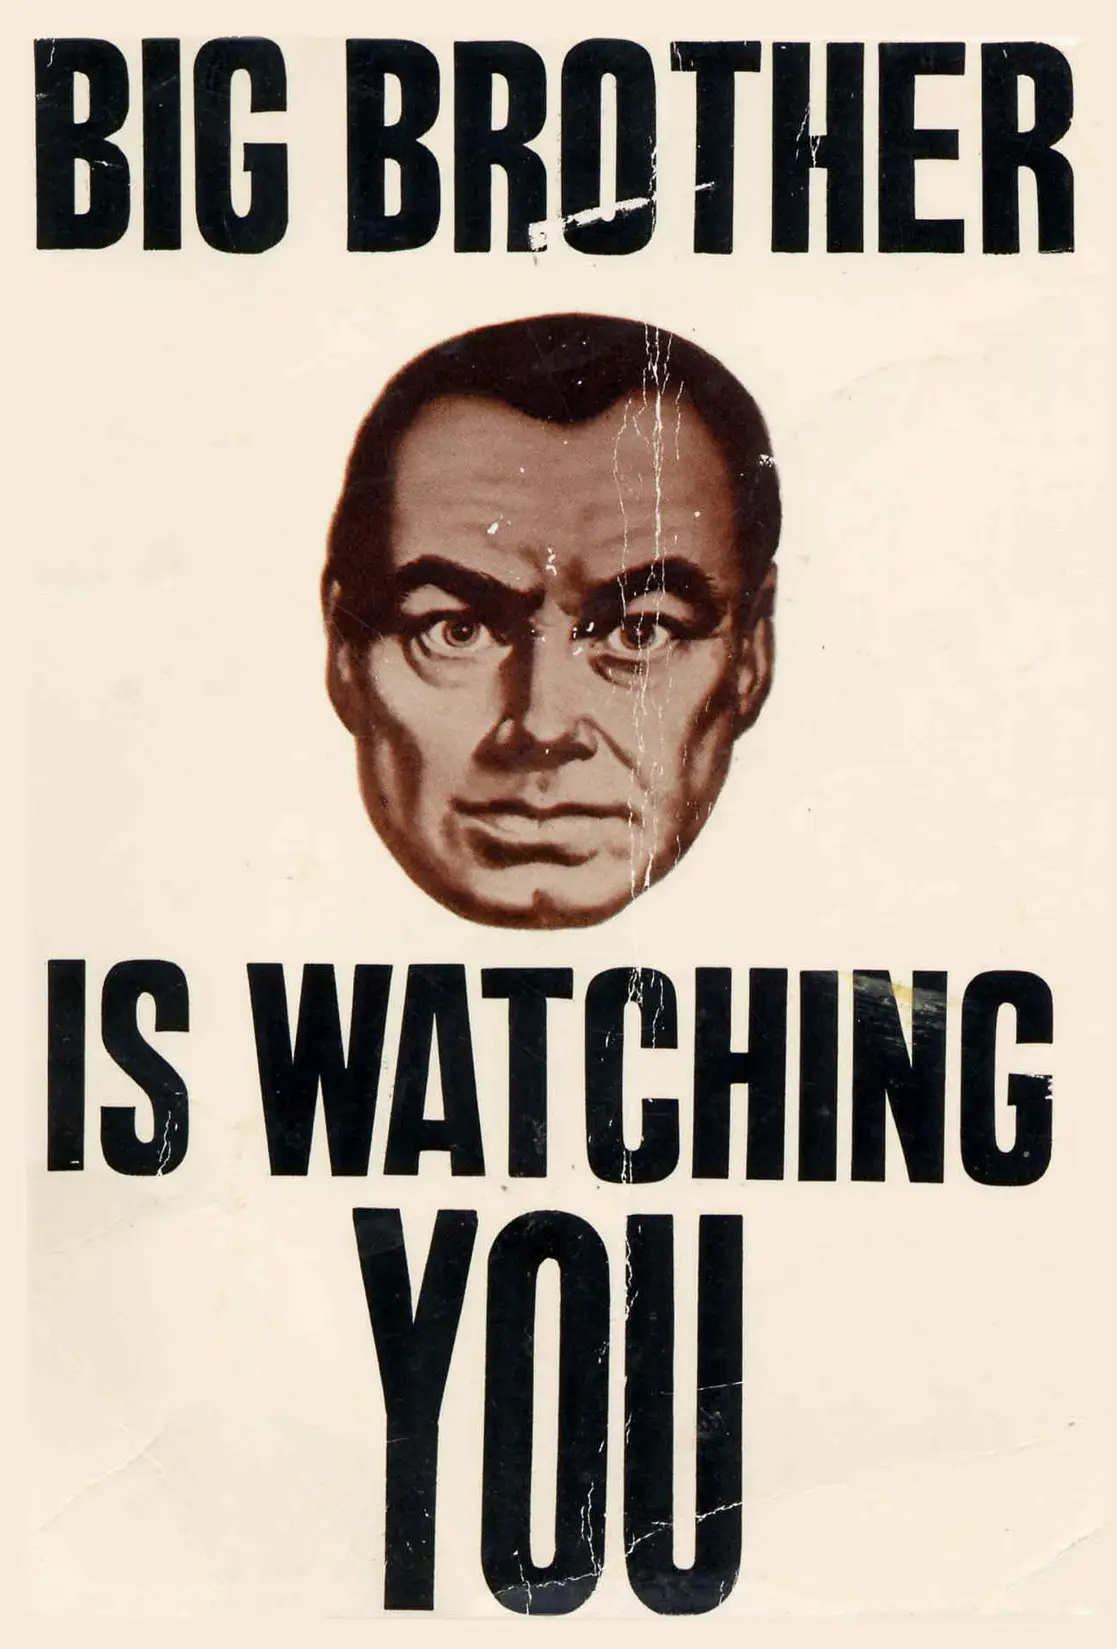 Big Brother is Watching YOU, 1984